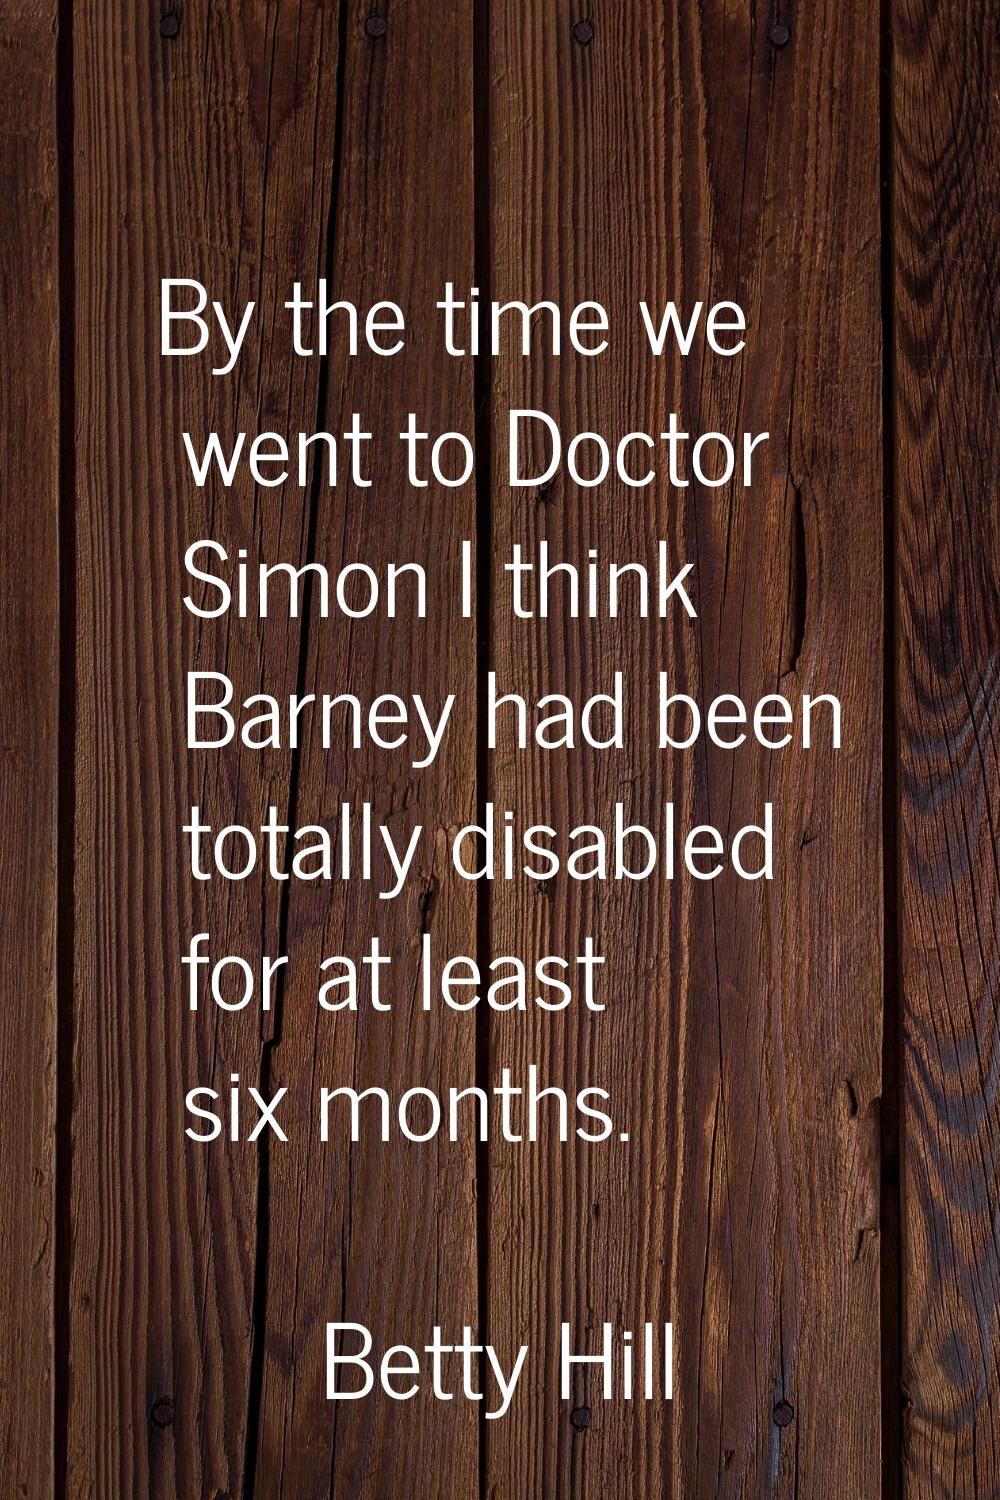 By the time we went to Doctor Simon I think Barney had been totally disabled for at least six month